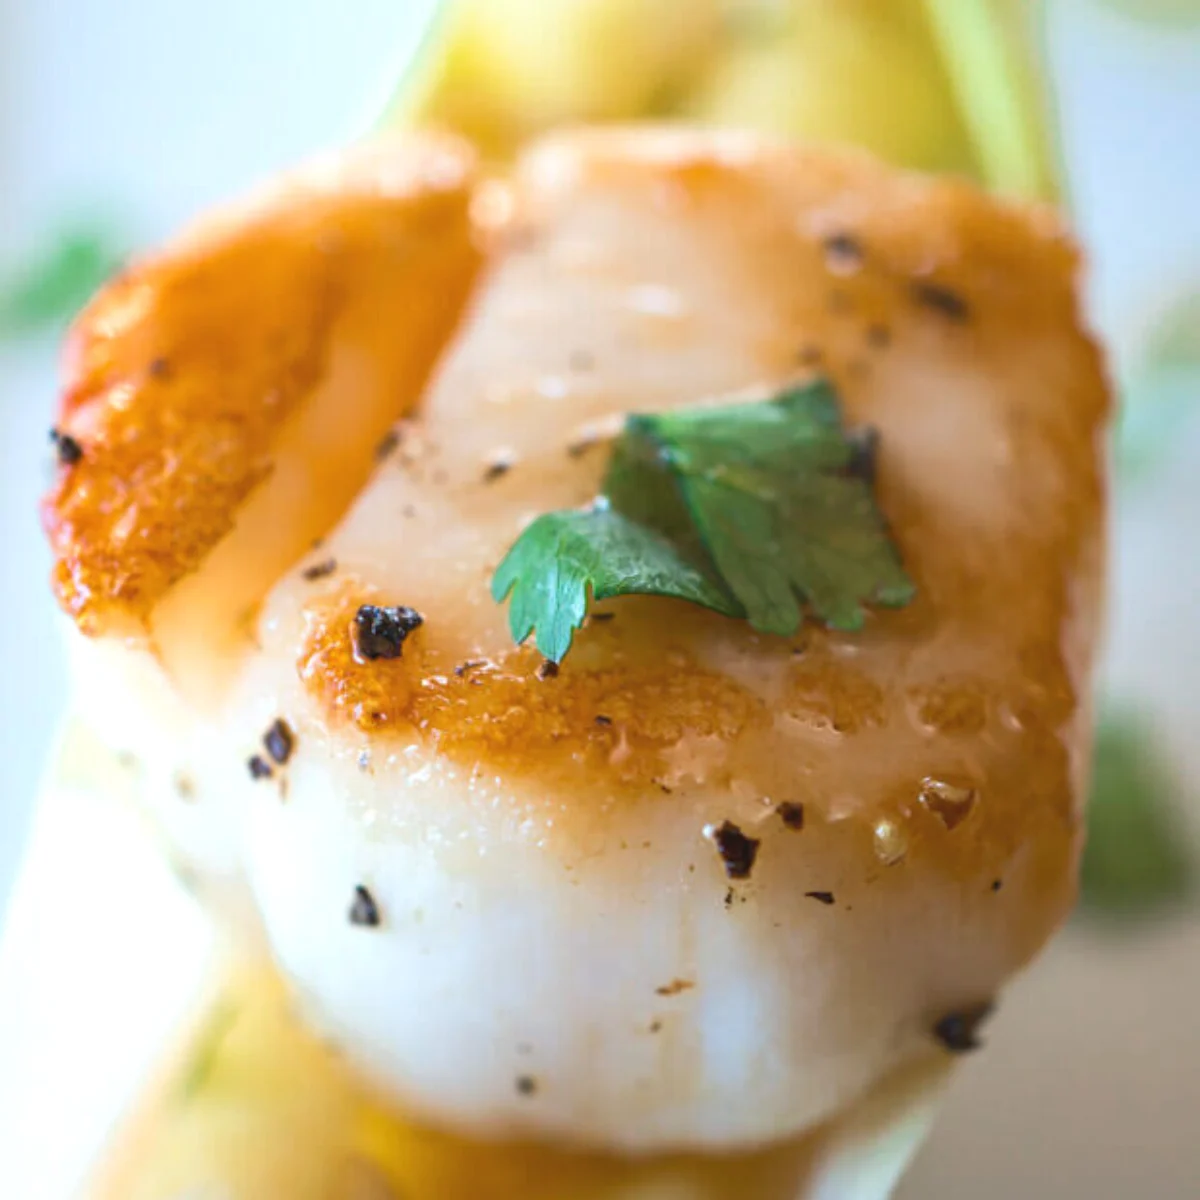 Close up view of a cooked scallop drizzed with wasabi sauce and garnished with cilantro and cracked black pepper - Hostess At Heart